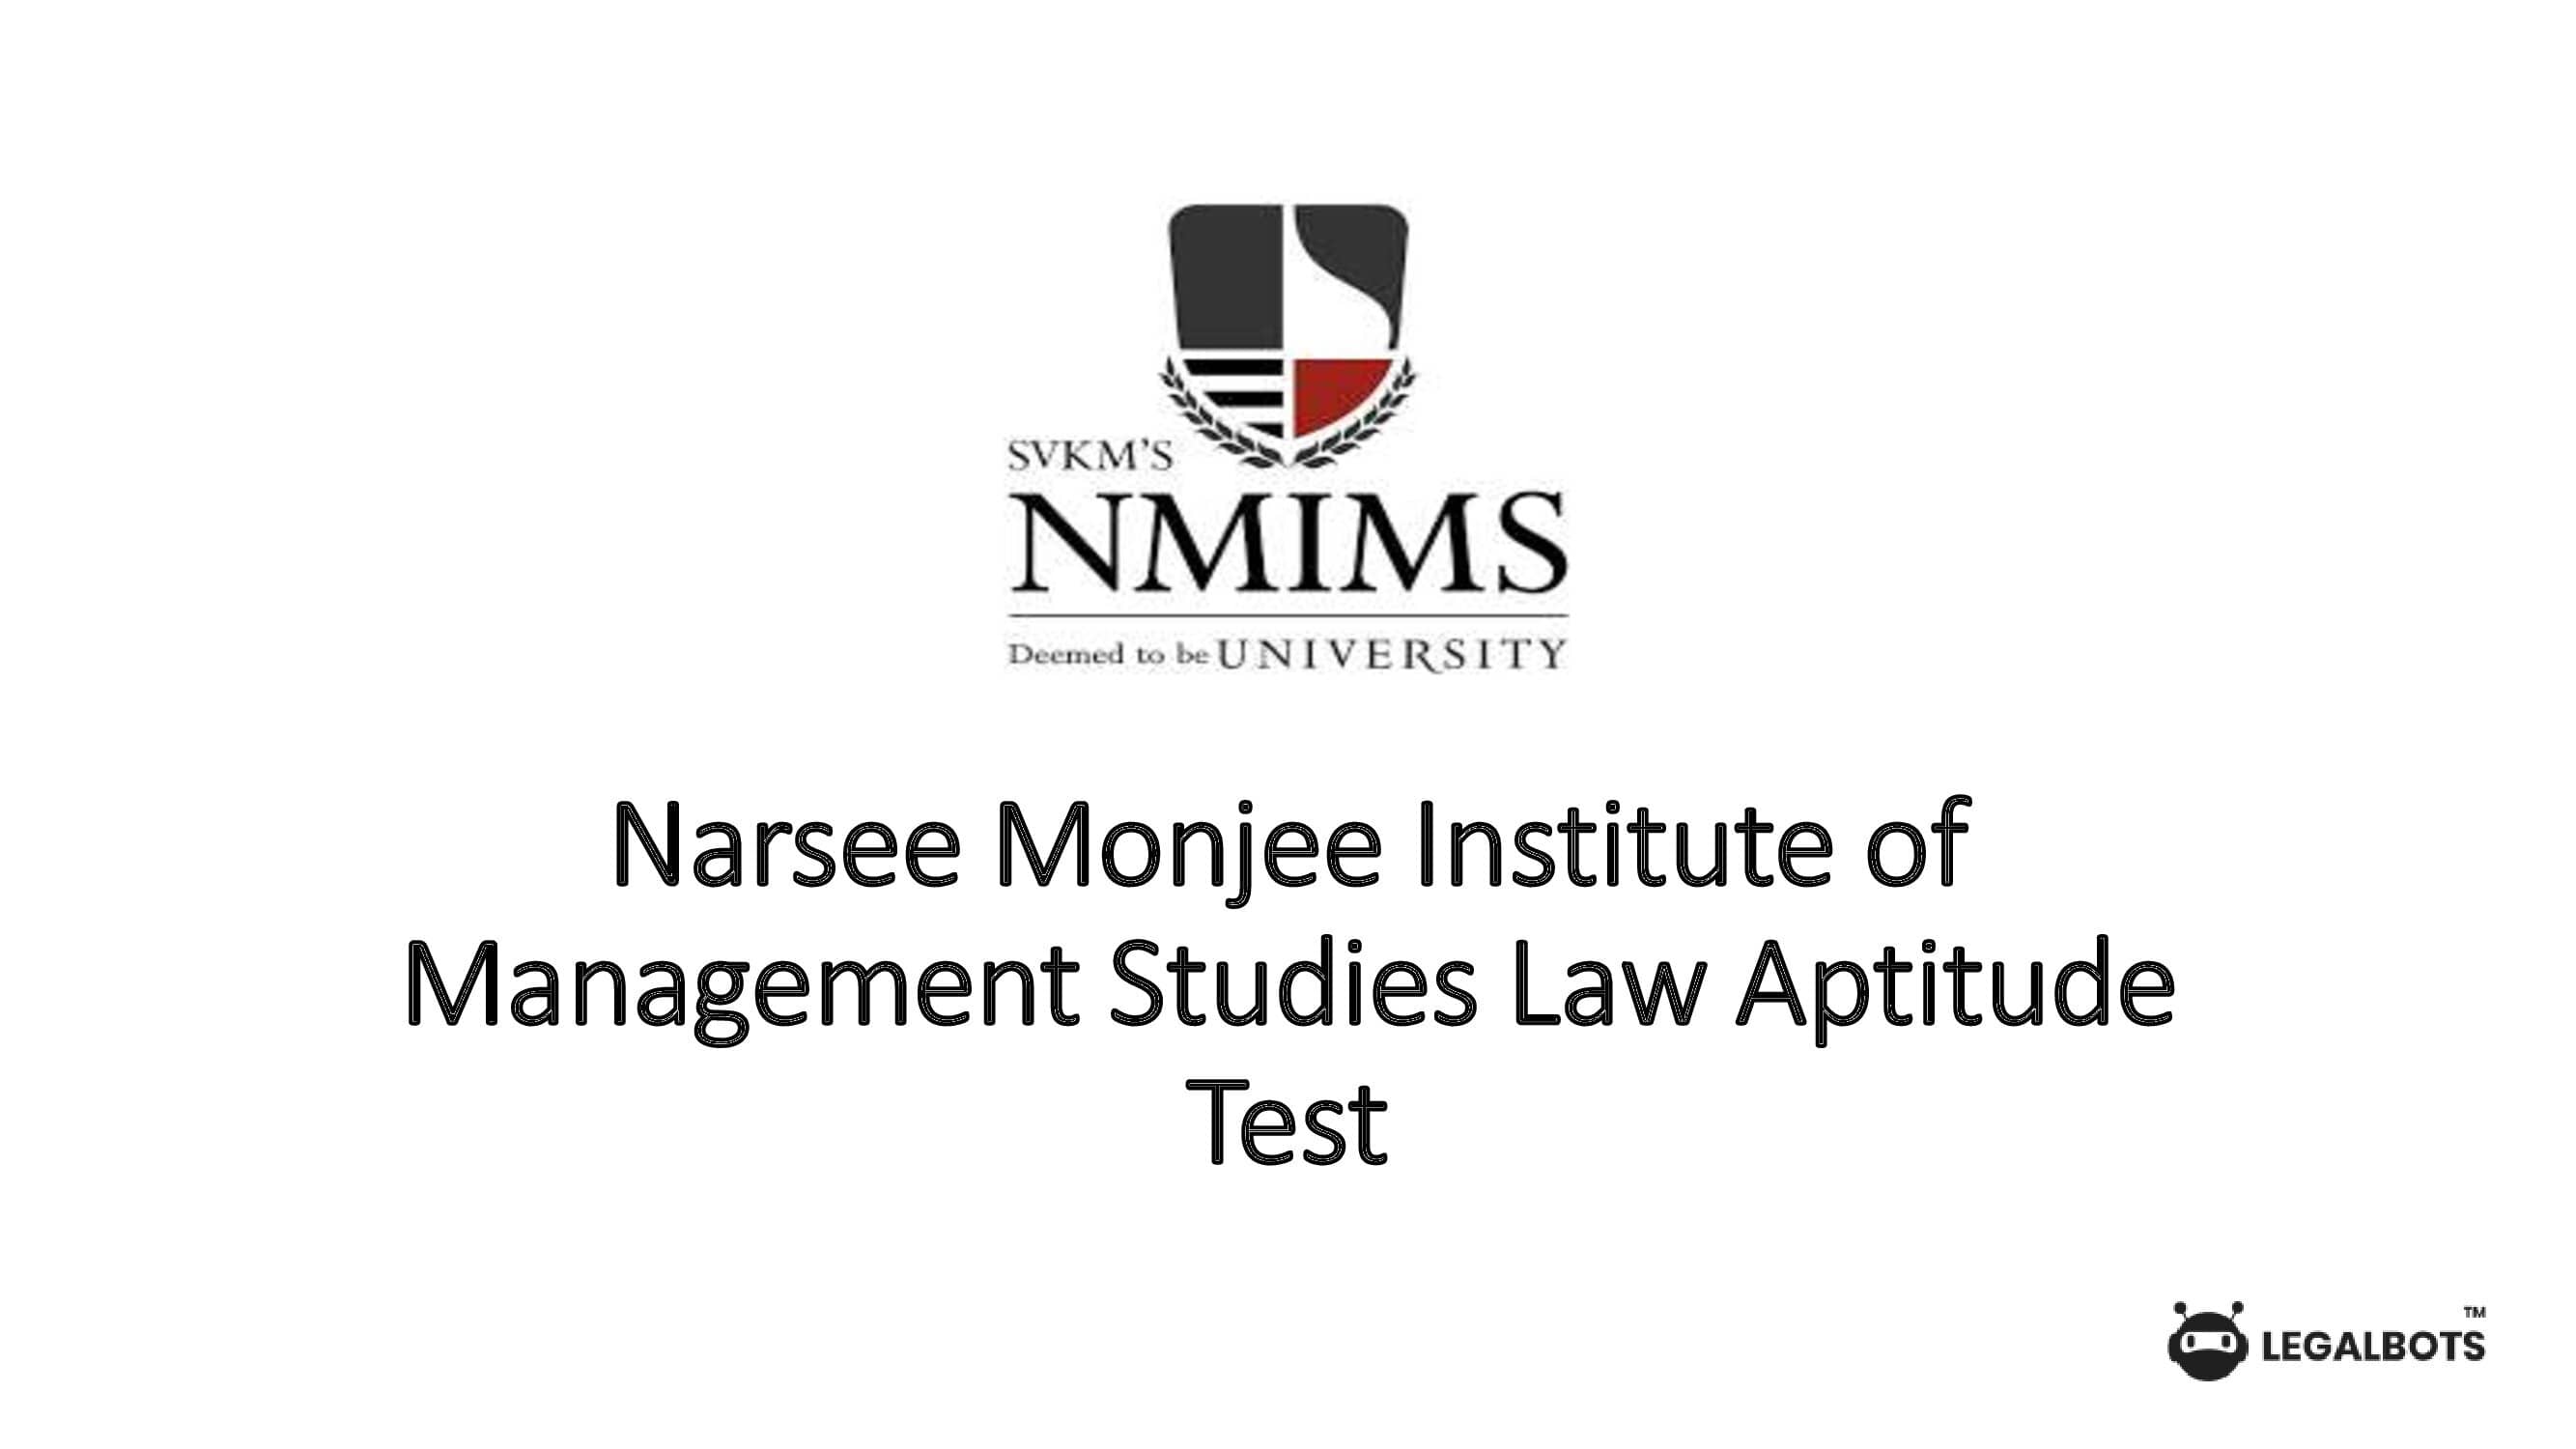 NMIMS (Narsee Monjee Institute of Management Studies Law Aptitude Test) LAT